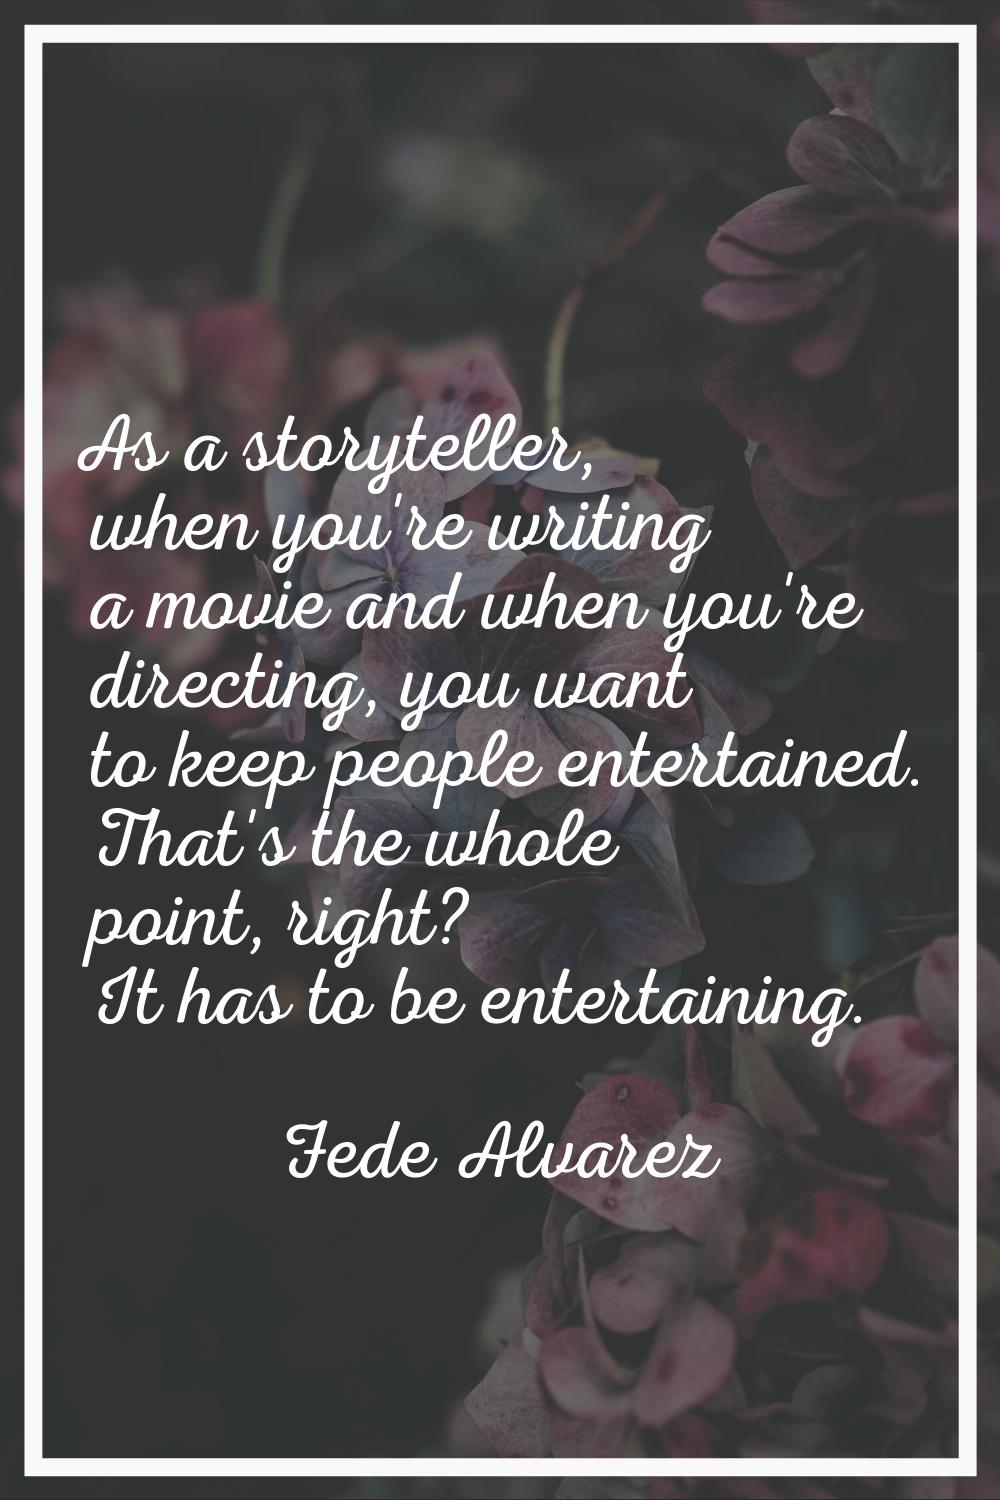 As a storyteller, when you're writing a movie and when you're directing, you want to keep people en